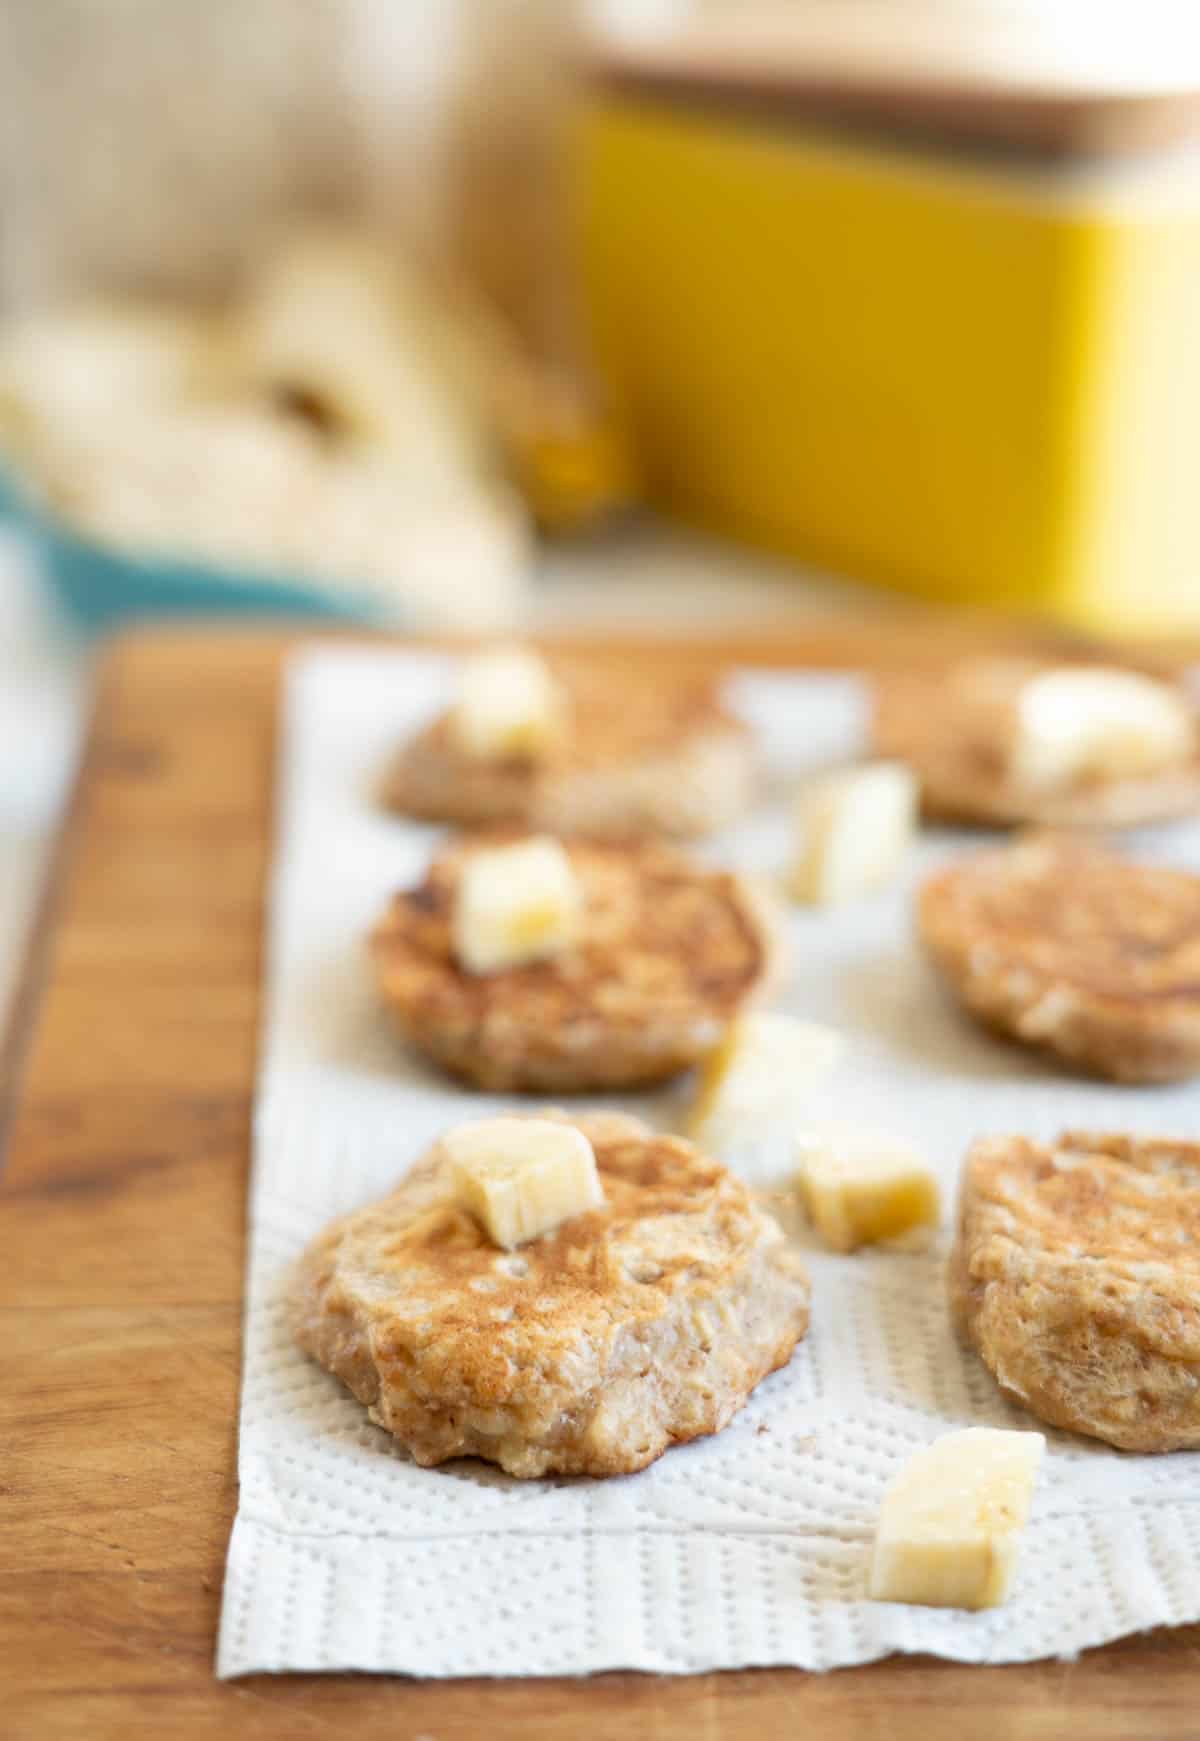 Banana oat pikelets on a paper towel scattered with small pieces of banana, a yellow butter dish in the background.